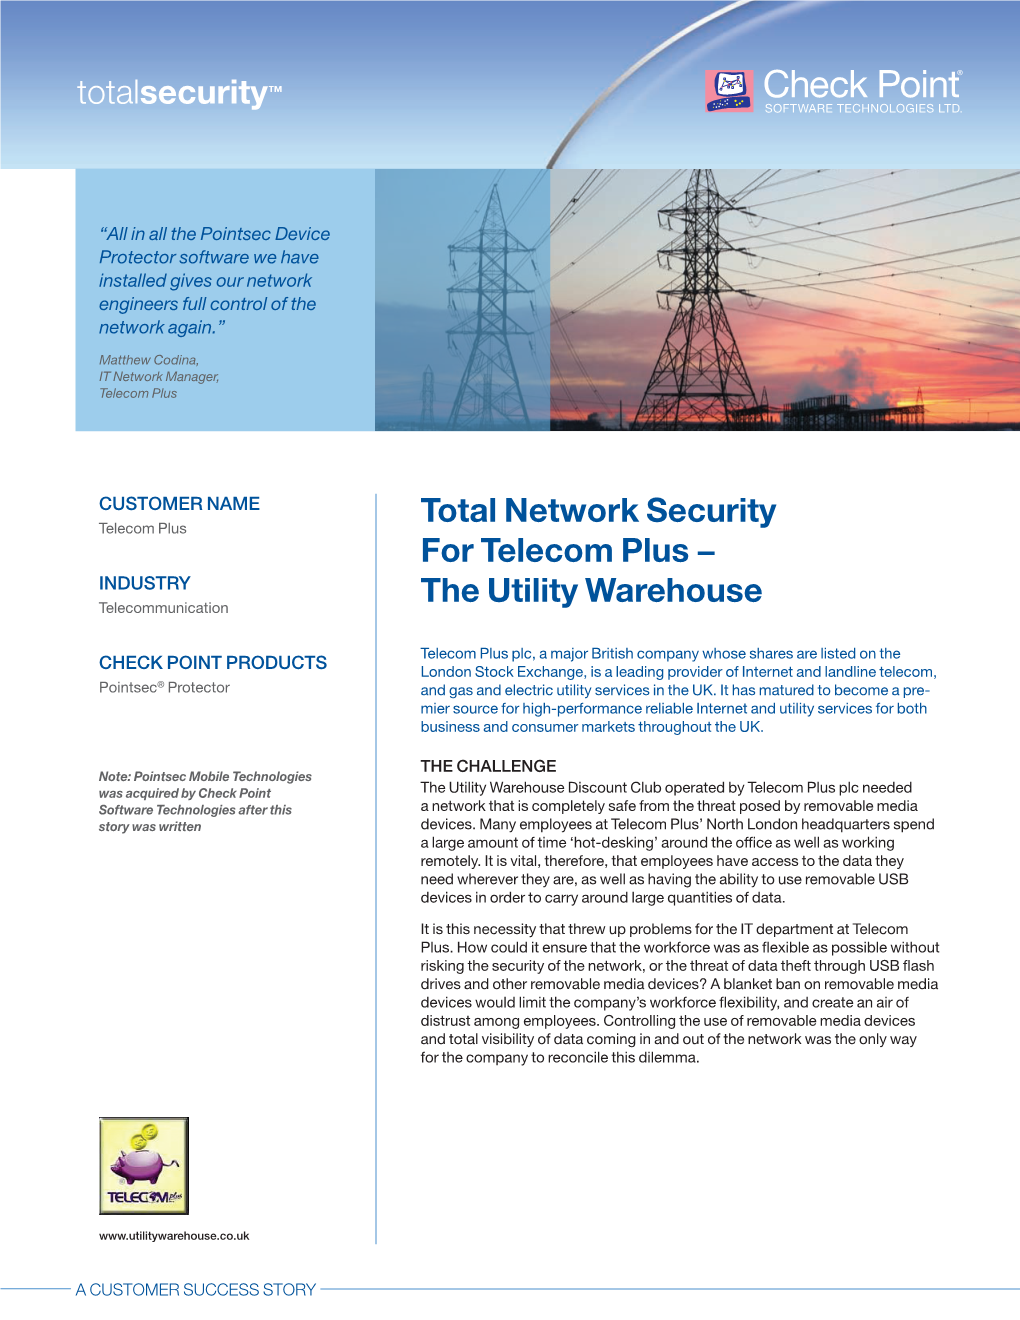 Total Network Security for Telecom Plus − the Utility Warehouse